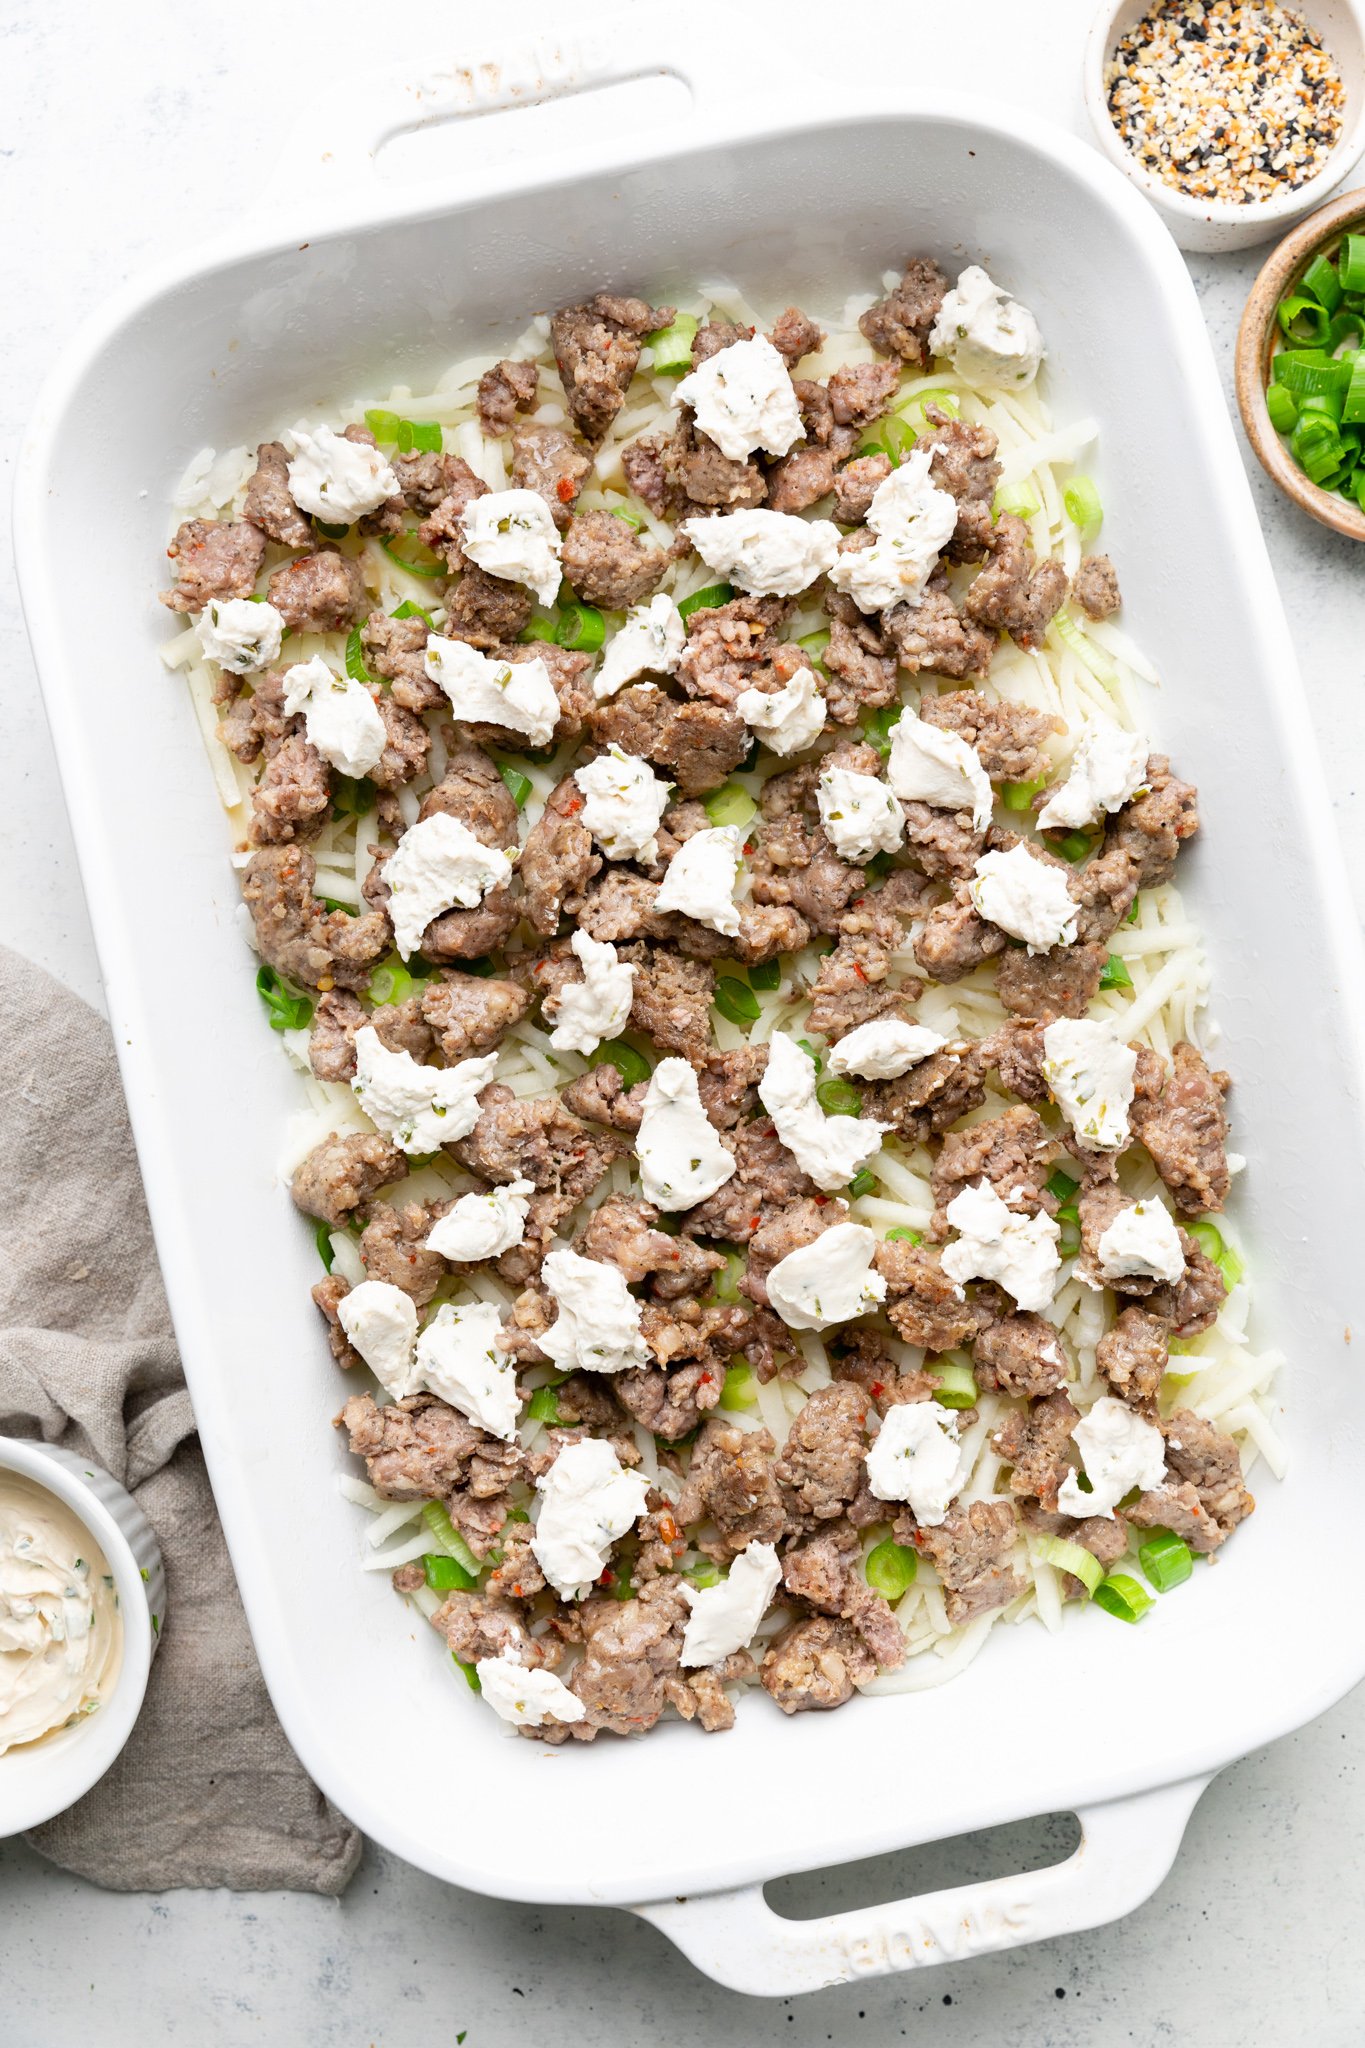 Sausage, dairy free cream cheese, green onions, and hash browns in a casserole dish